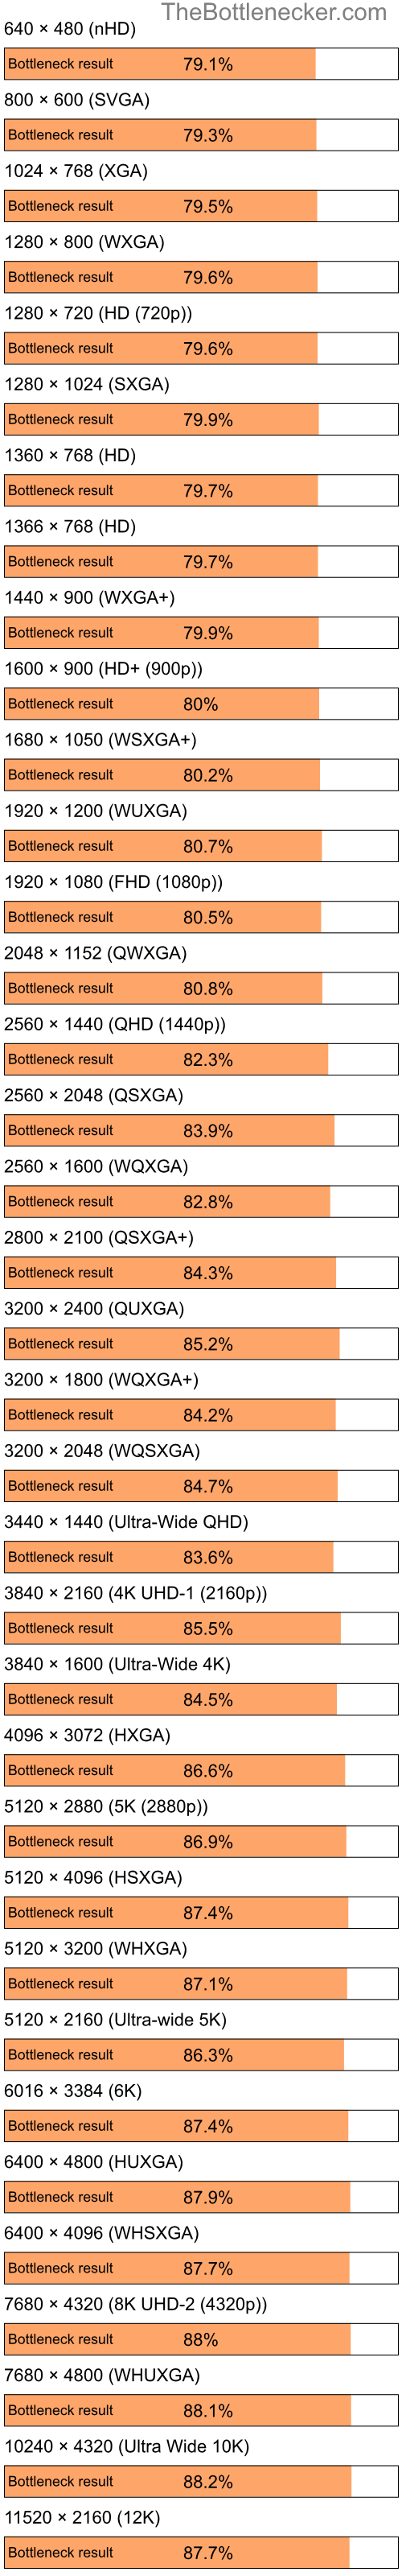 Bottleneck results by resolution for Intel Celeron and AMD Mobility Radeon X1400 in Graphic Card Intense Tasks